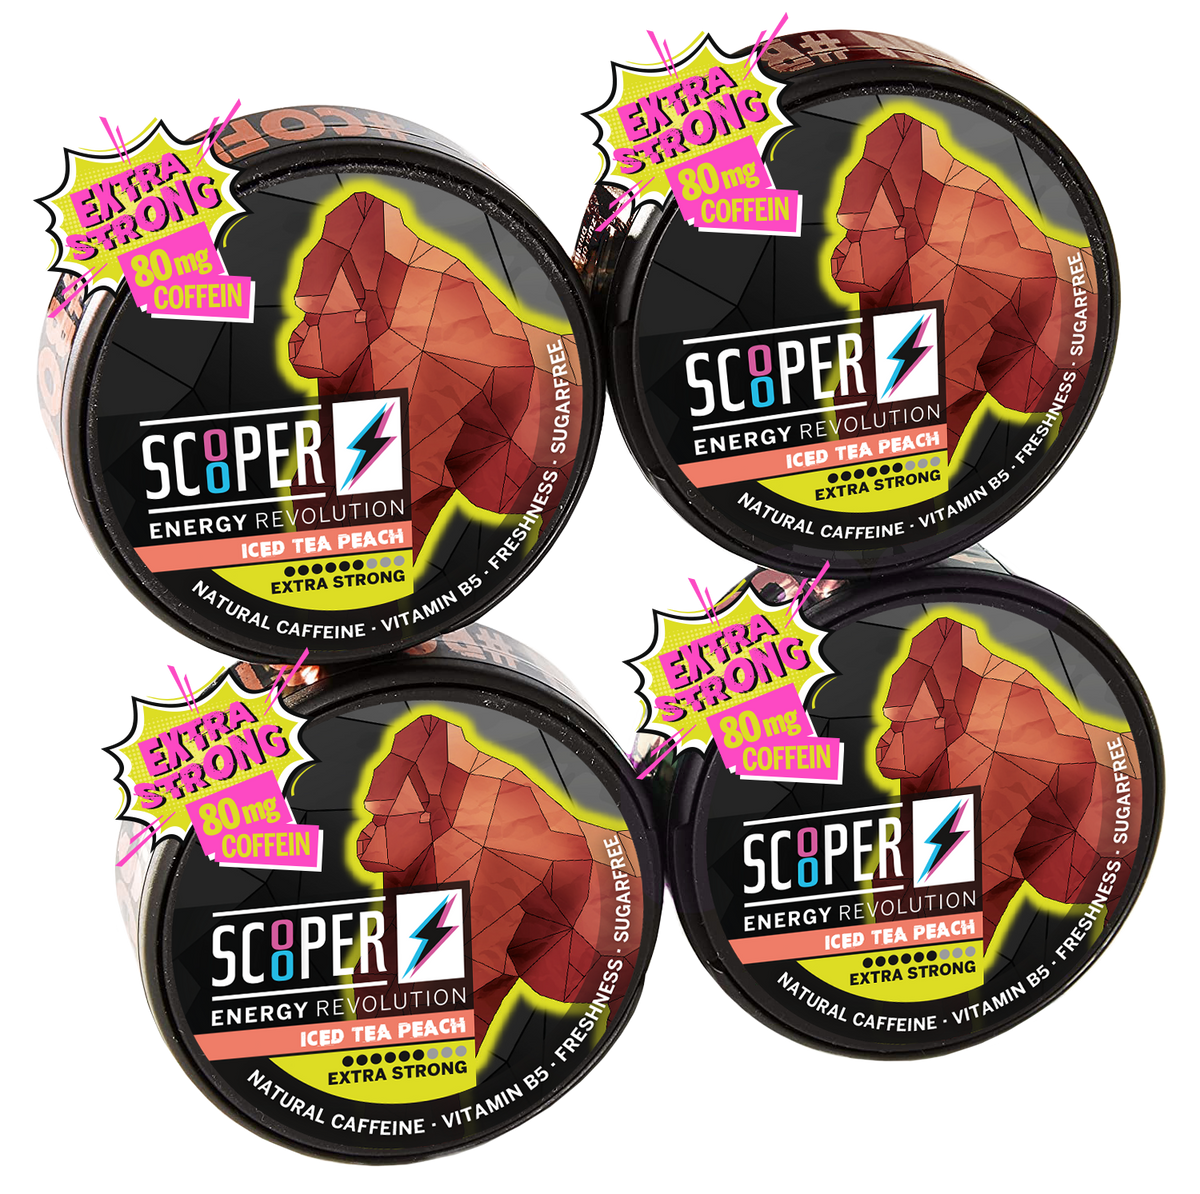 SCOOPER Energy Iced Tea Peach Extra Strong Box (4 cans)